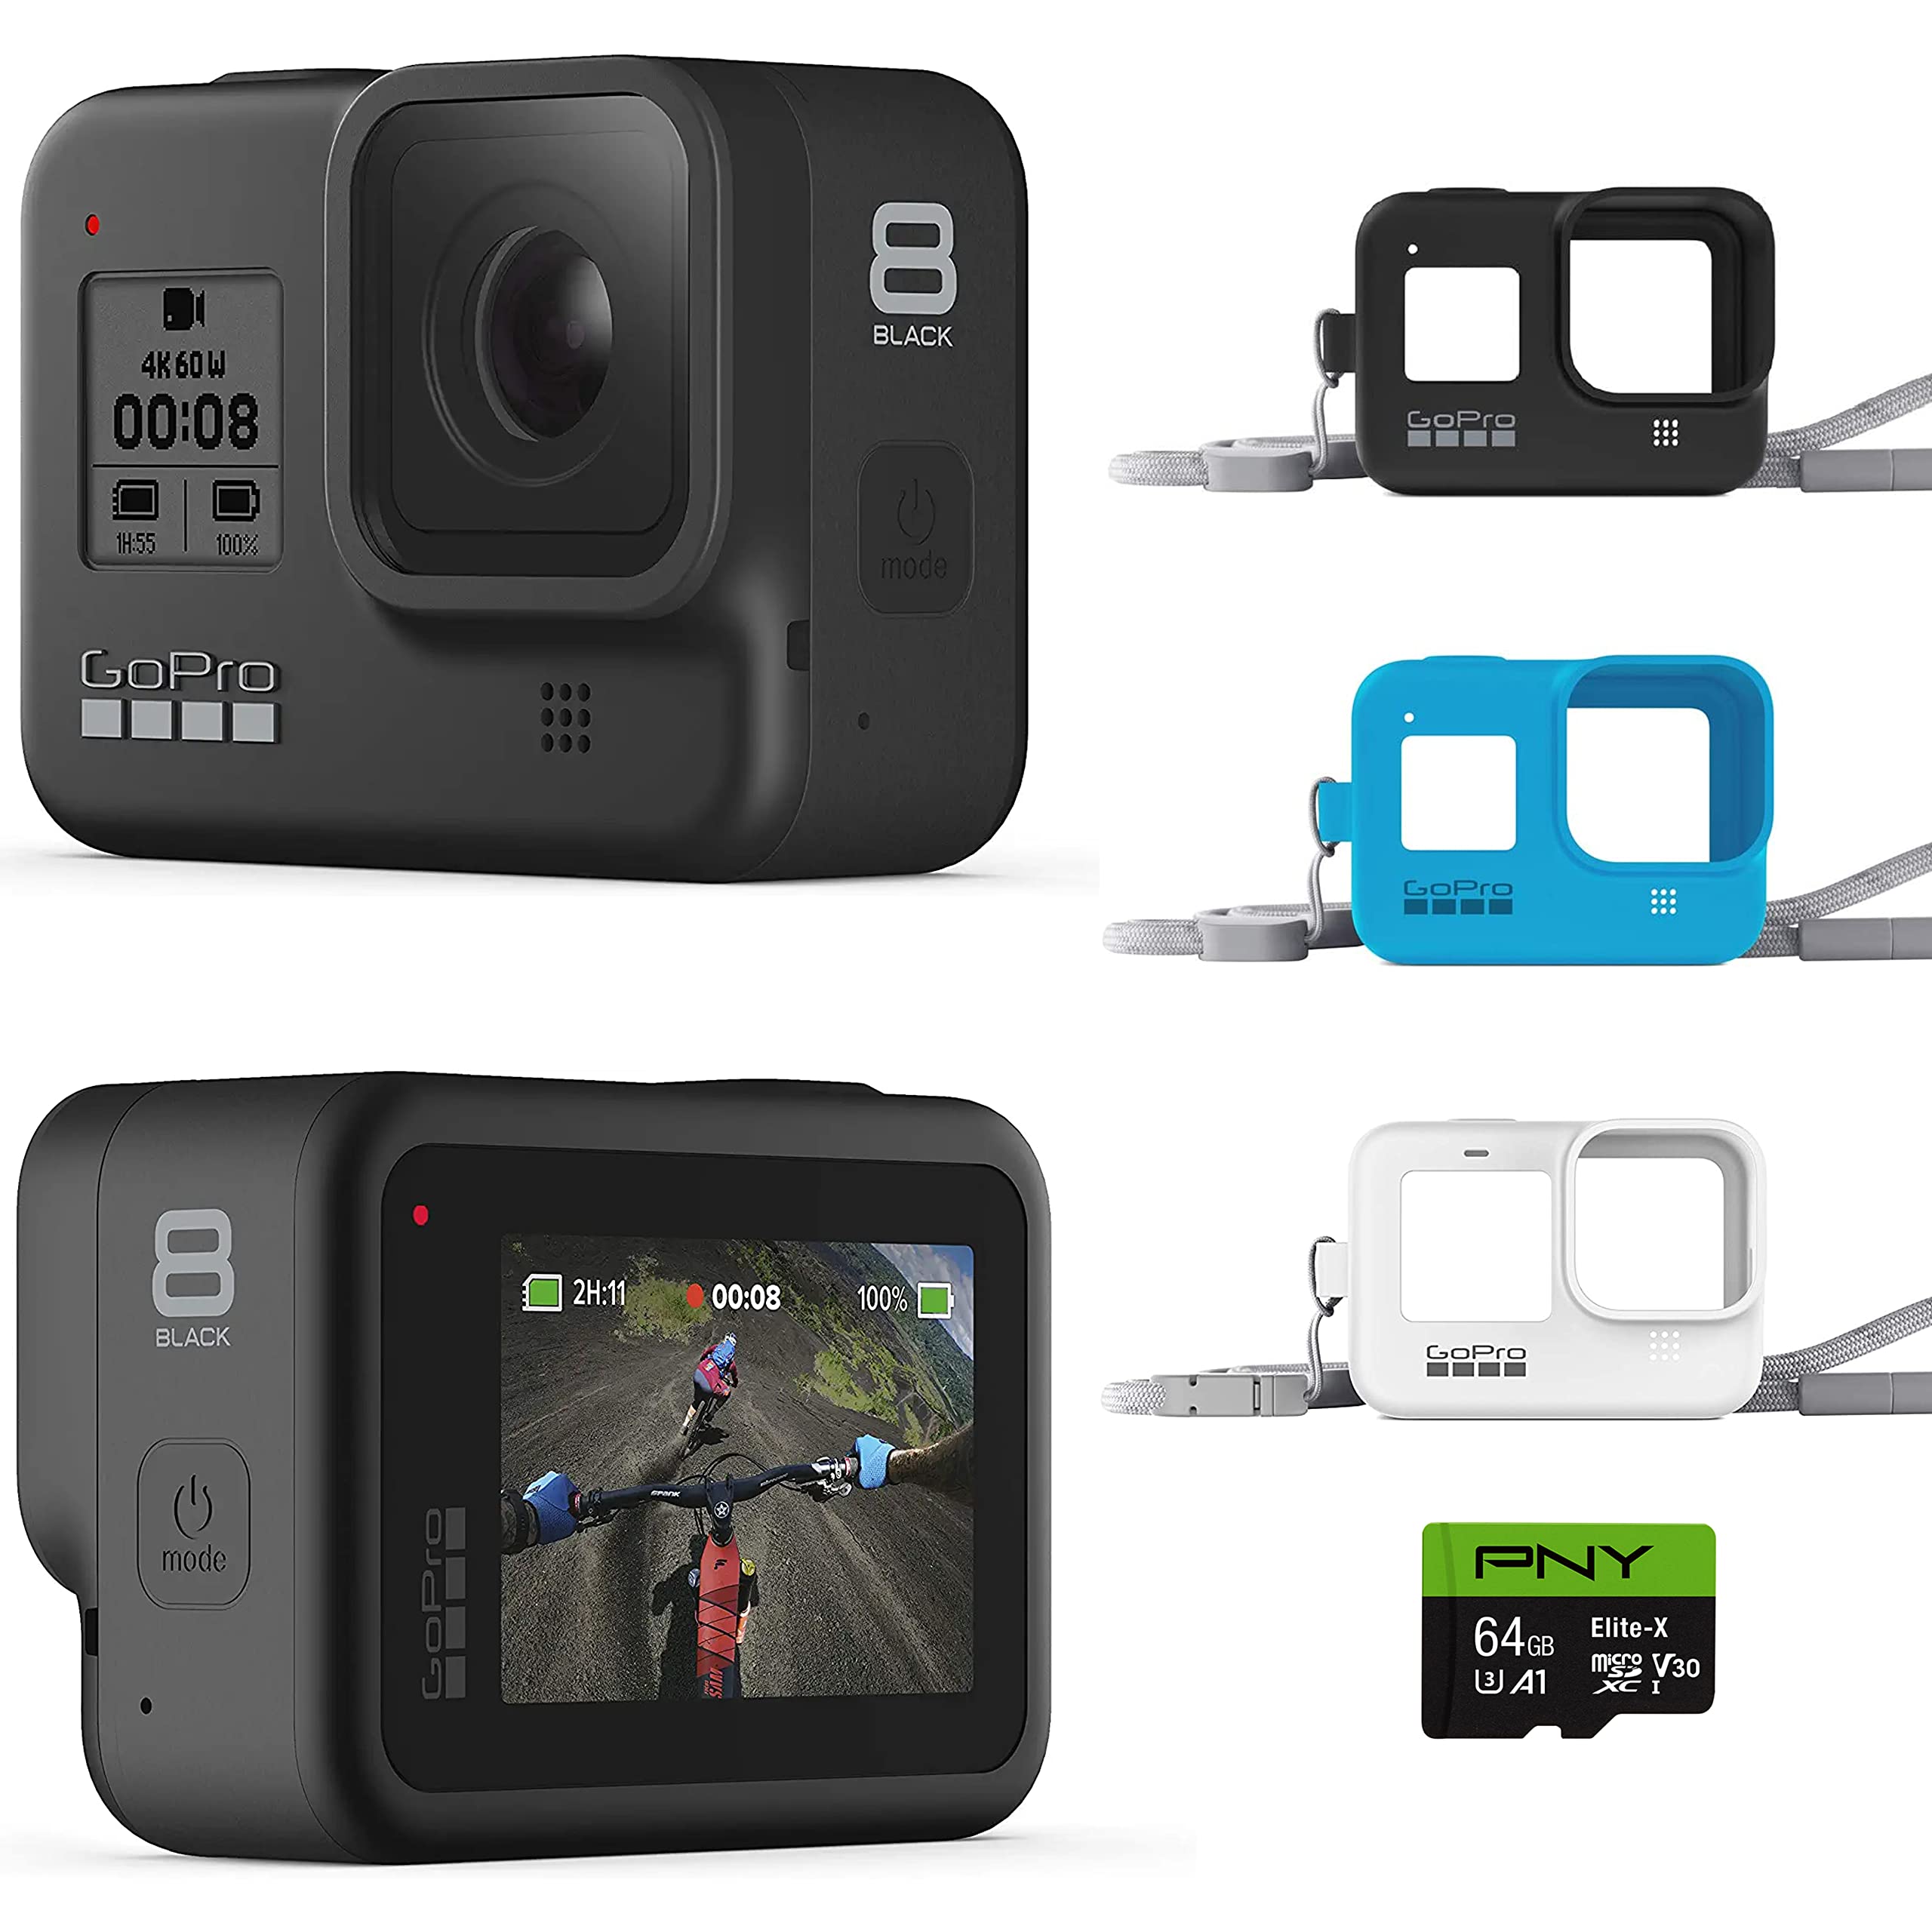 GoPro HERO8 Black + Lanyard + 64 GB SD Card - E-Commerce Packaging - Waterproof Digital Action Camera with Touch Screen 4K HD Video 12MP Photos Live Streaming Stabilization